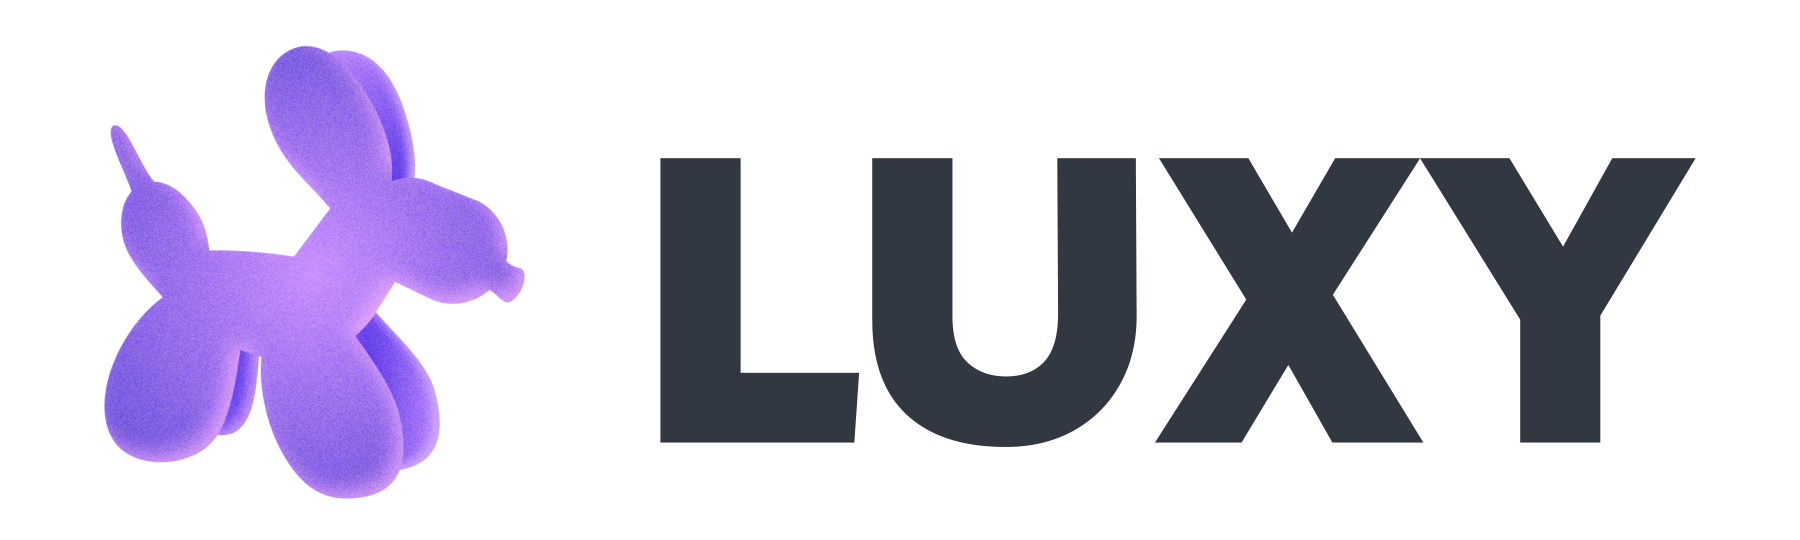 Luxy - NFT marketplace on Polygon, launched by Axion Launch